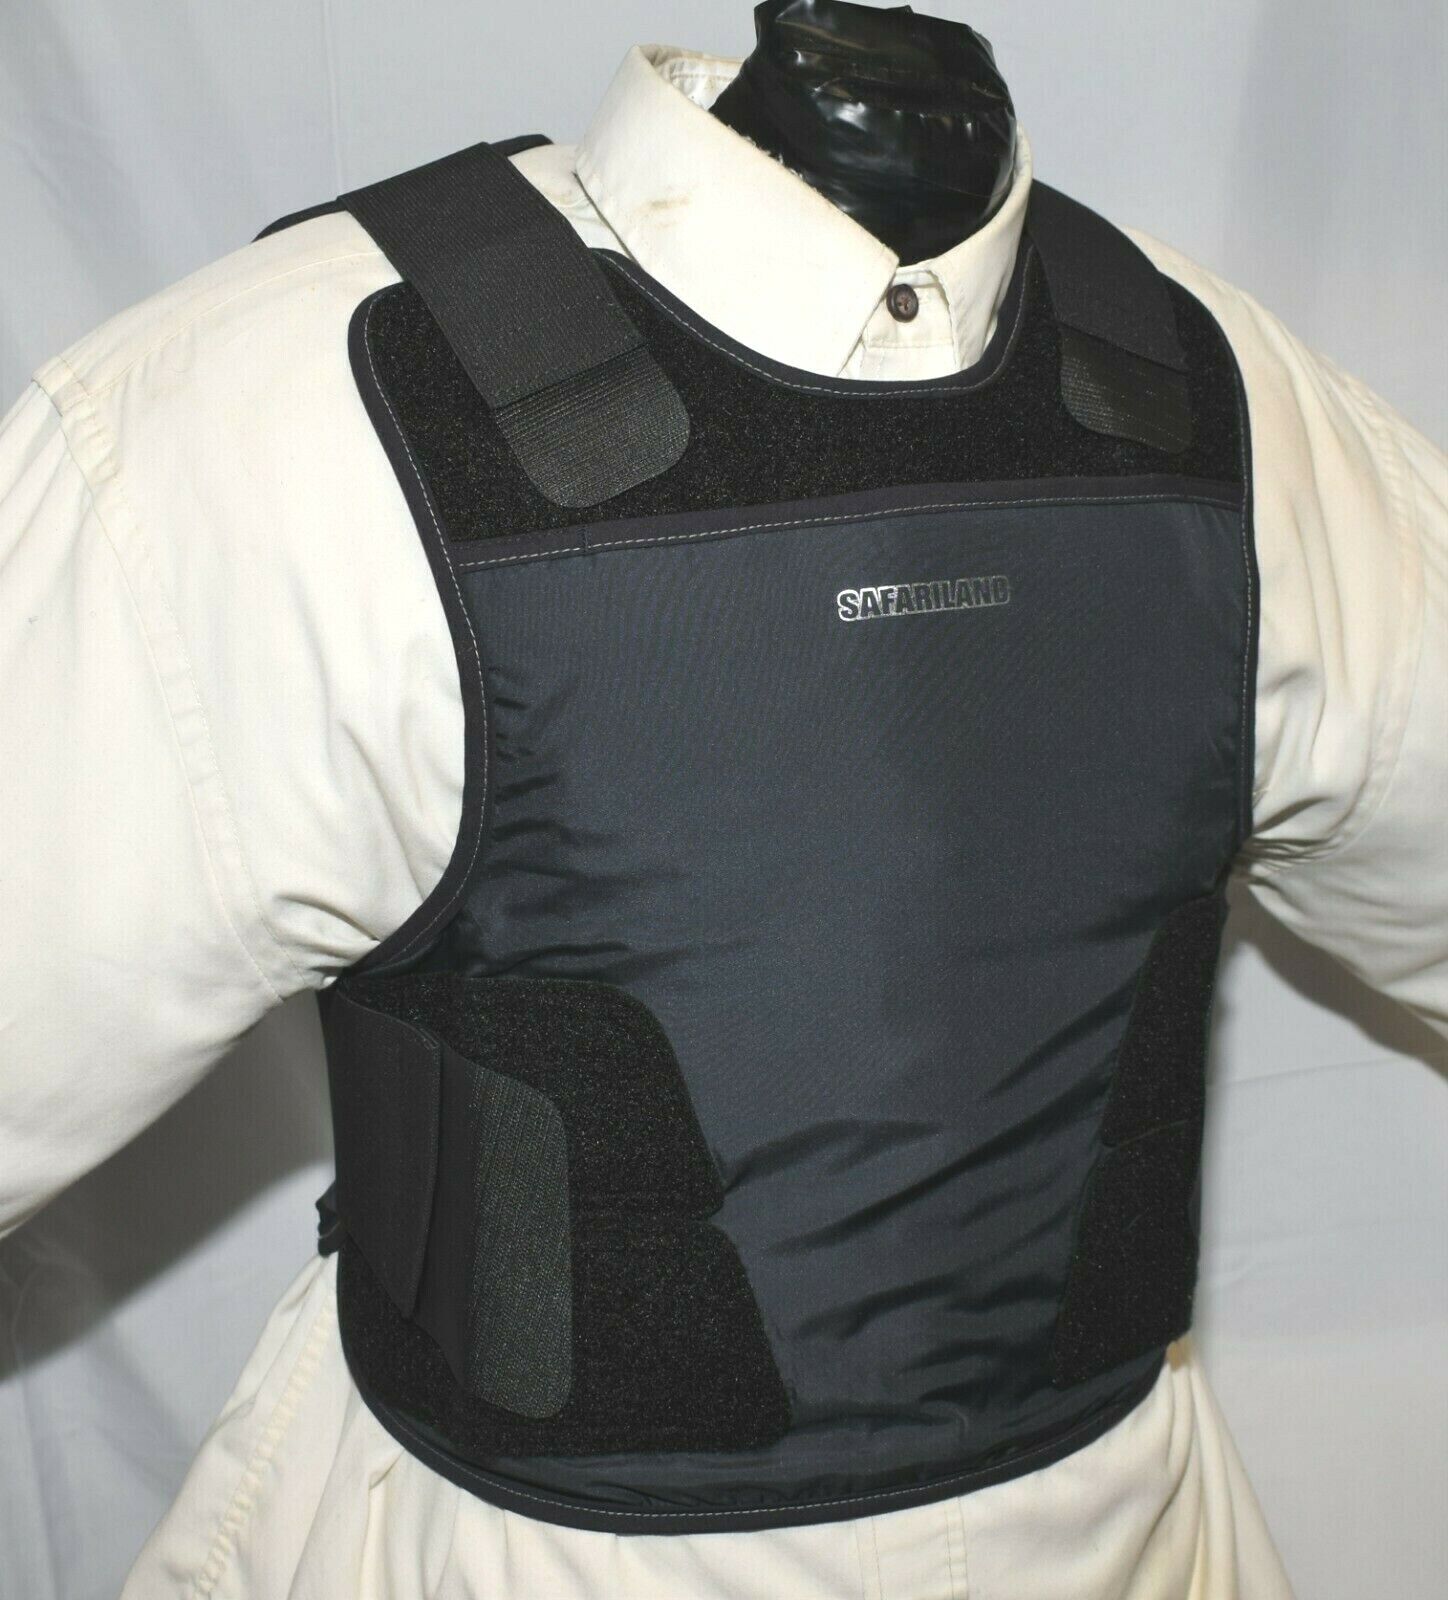 New Large Safariland Concealable Vest Lvl IIIA Inserts Body Armor Bullet Proof 